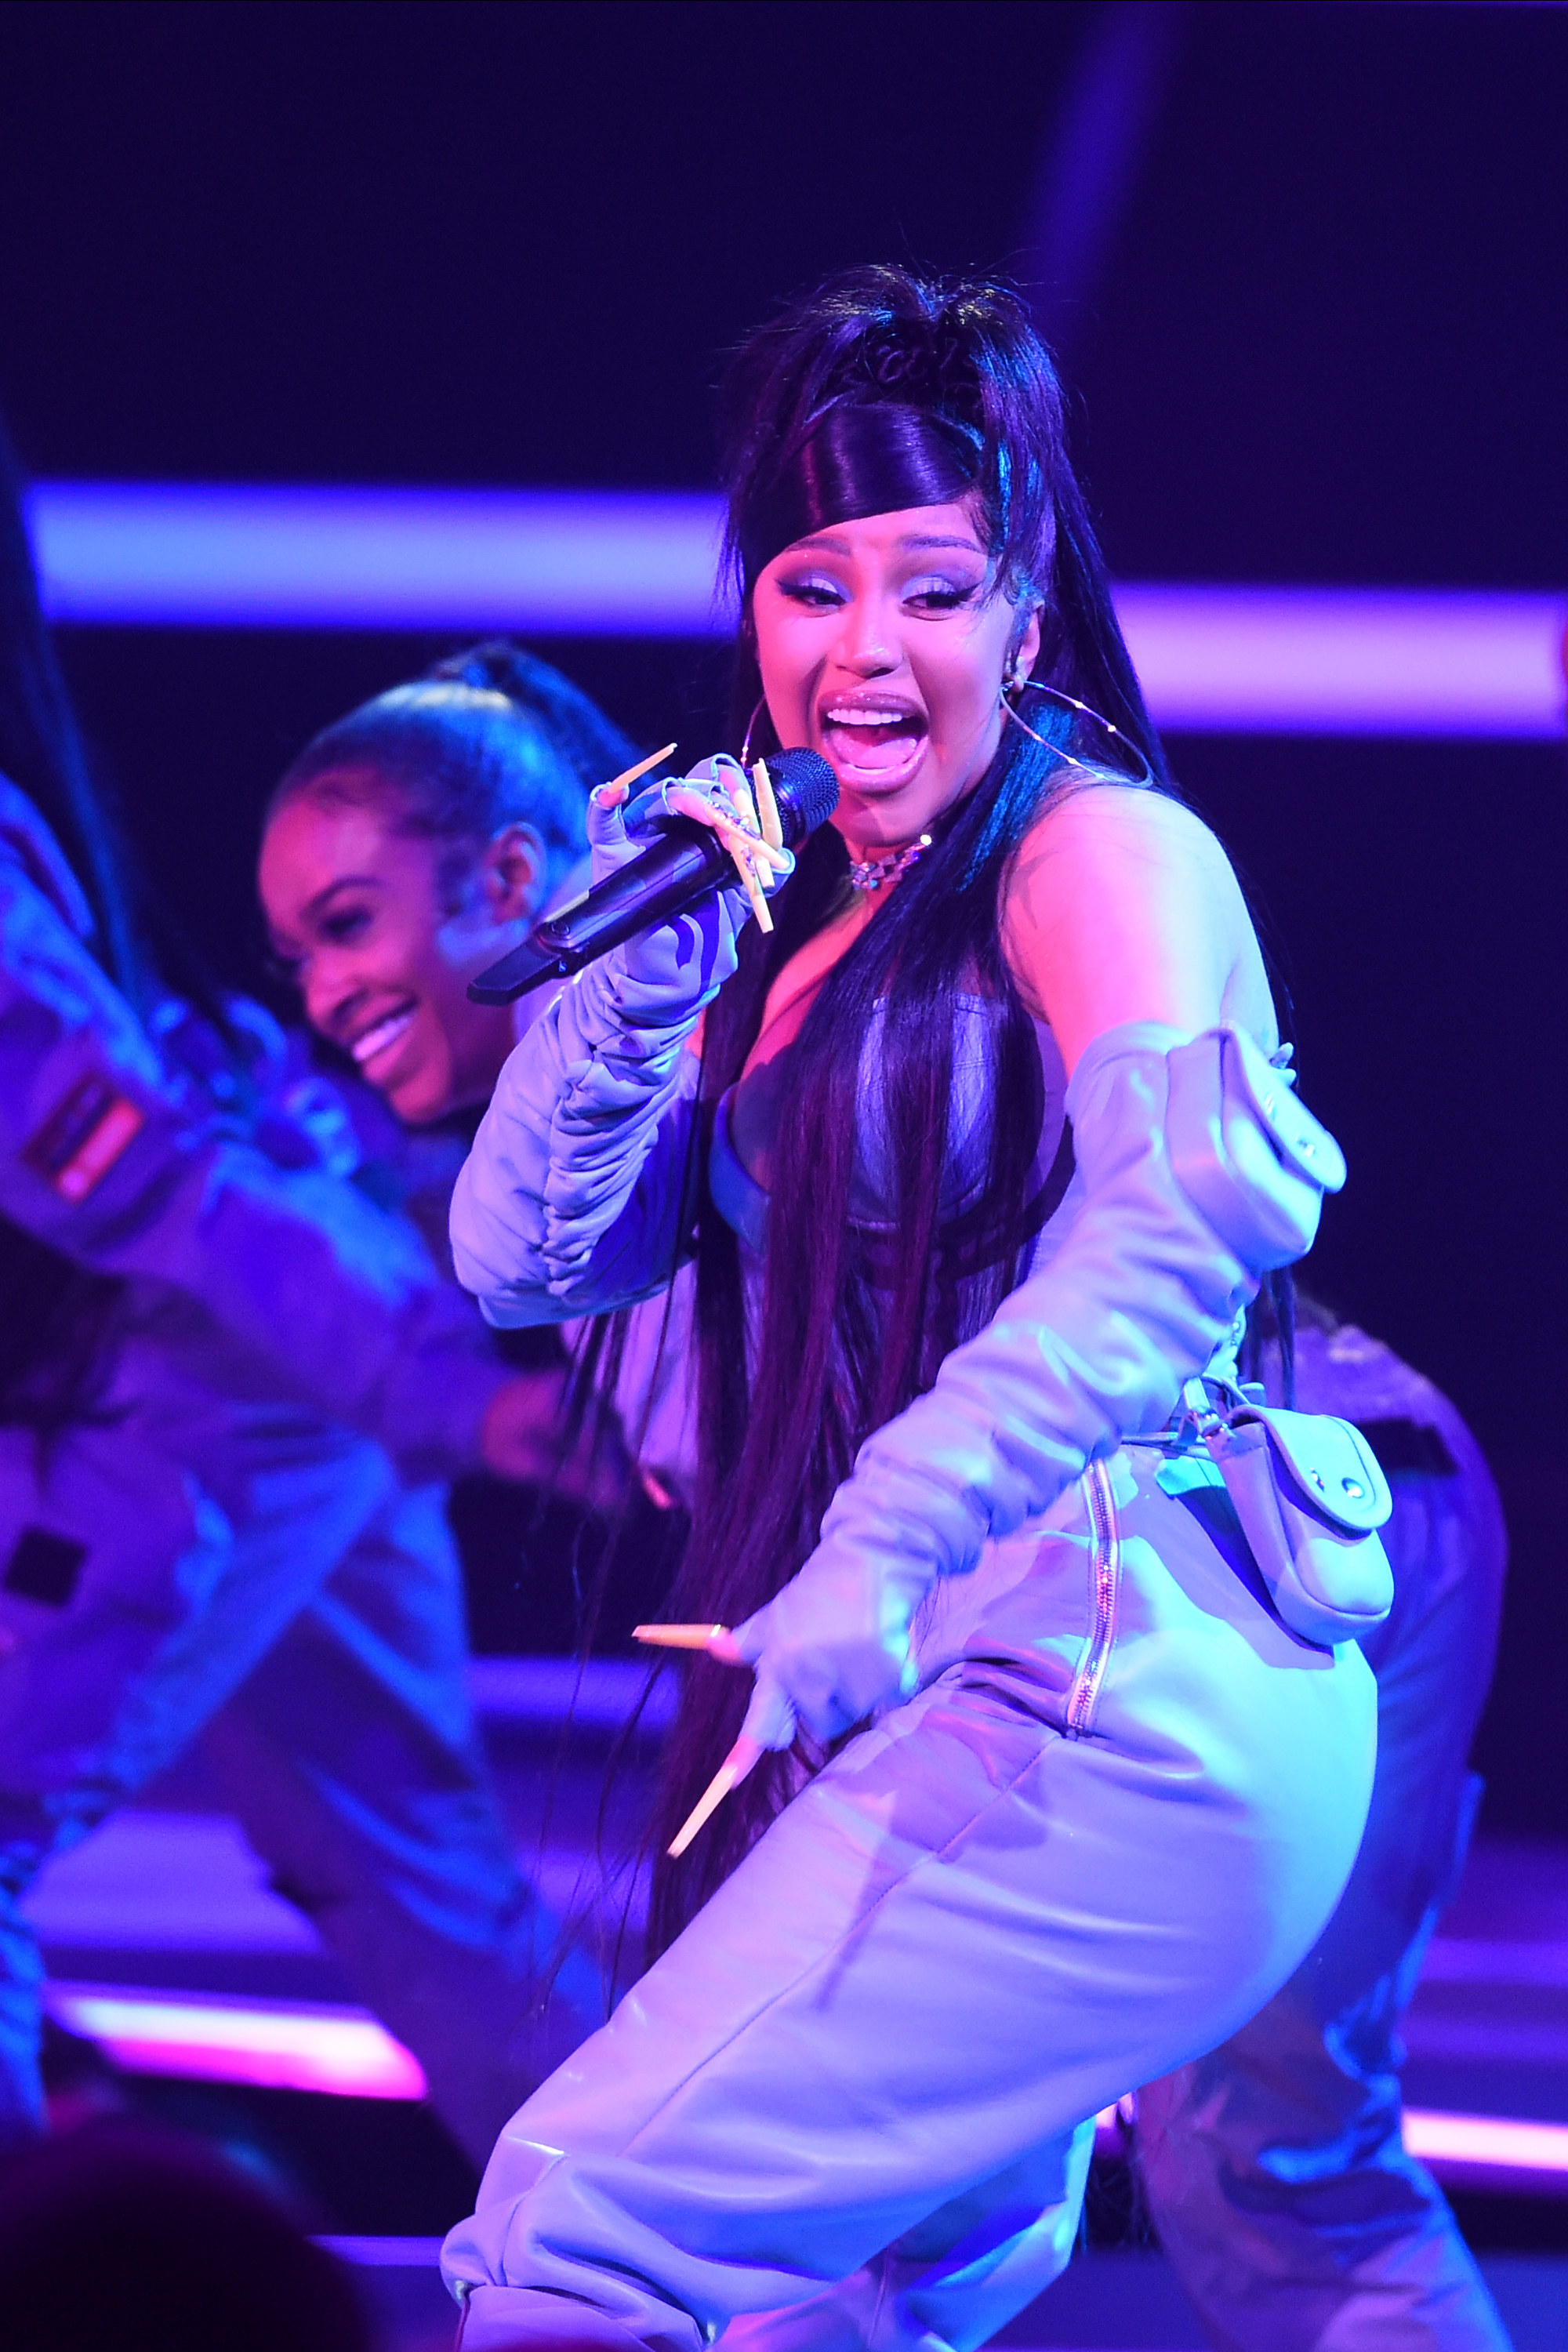 Cardi performing onstage with backup dancers